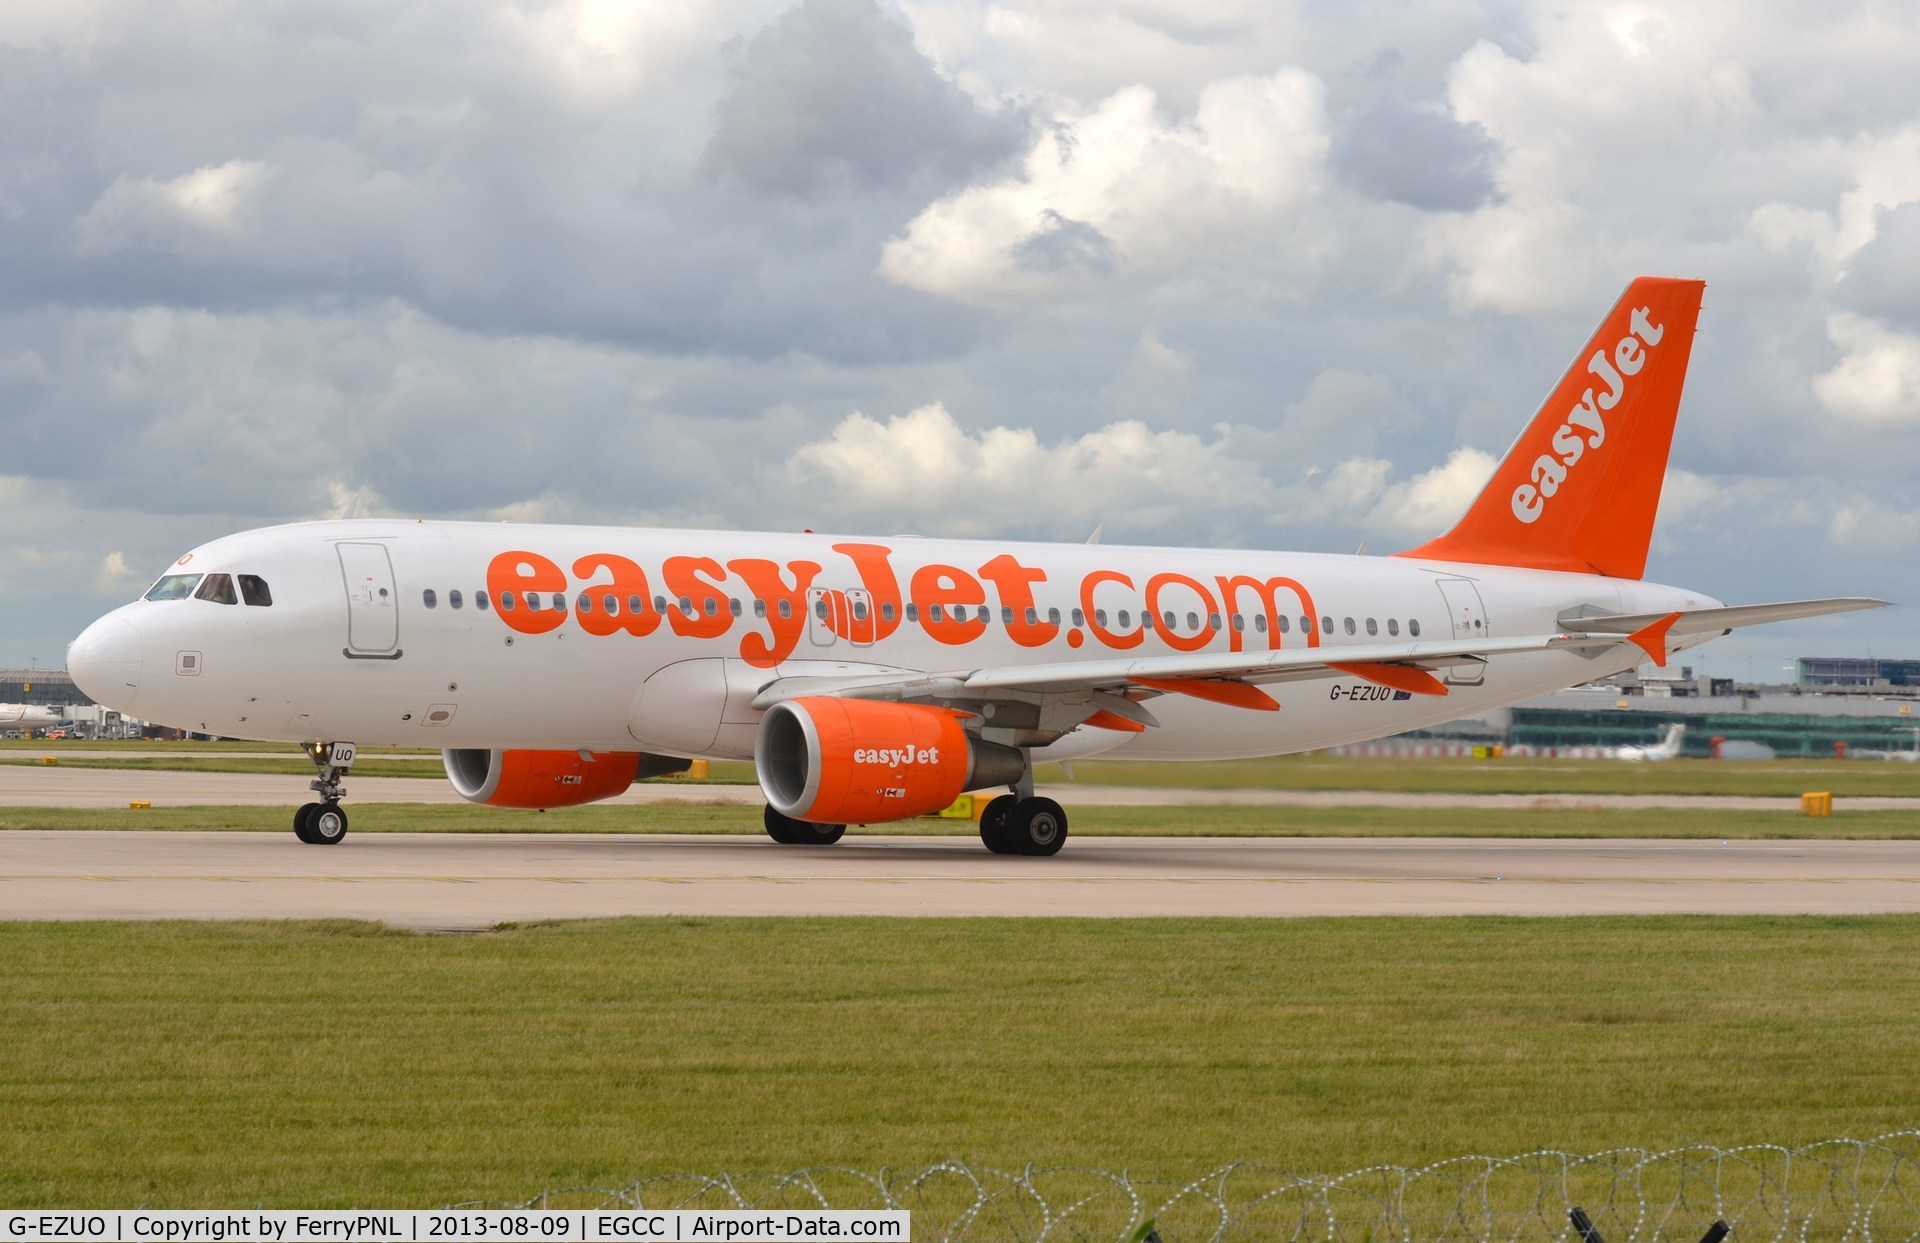 G-EZUO, 2012 Airbus A320-214 C/N 5052, Easyjet A320 lining up